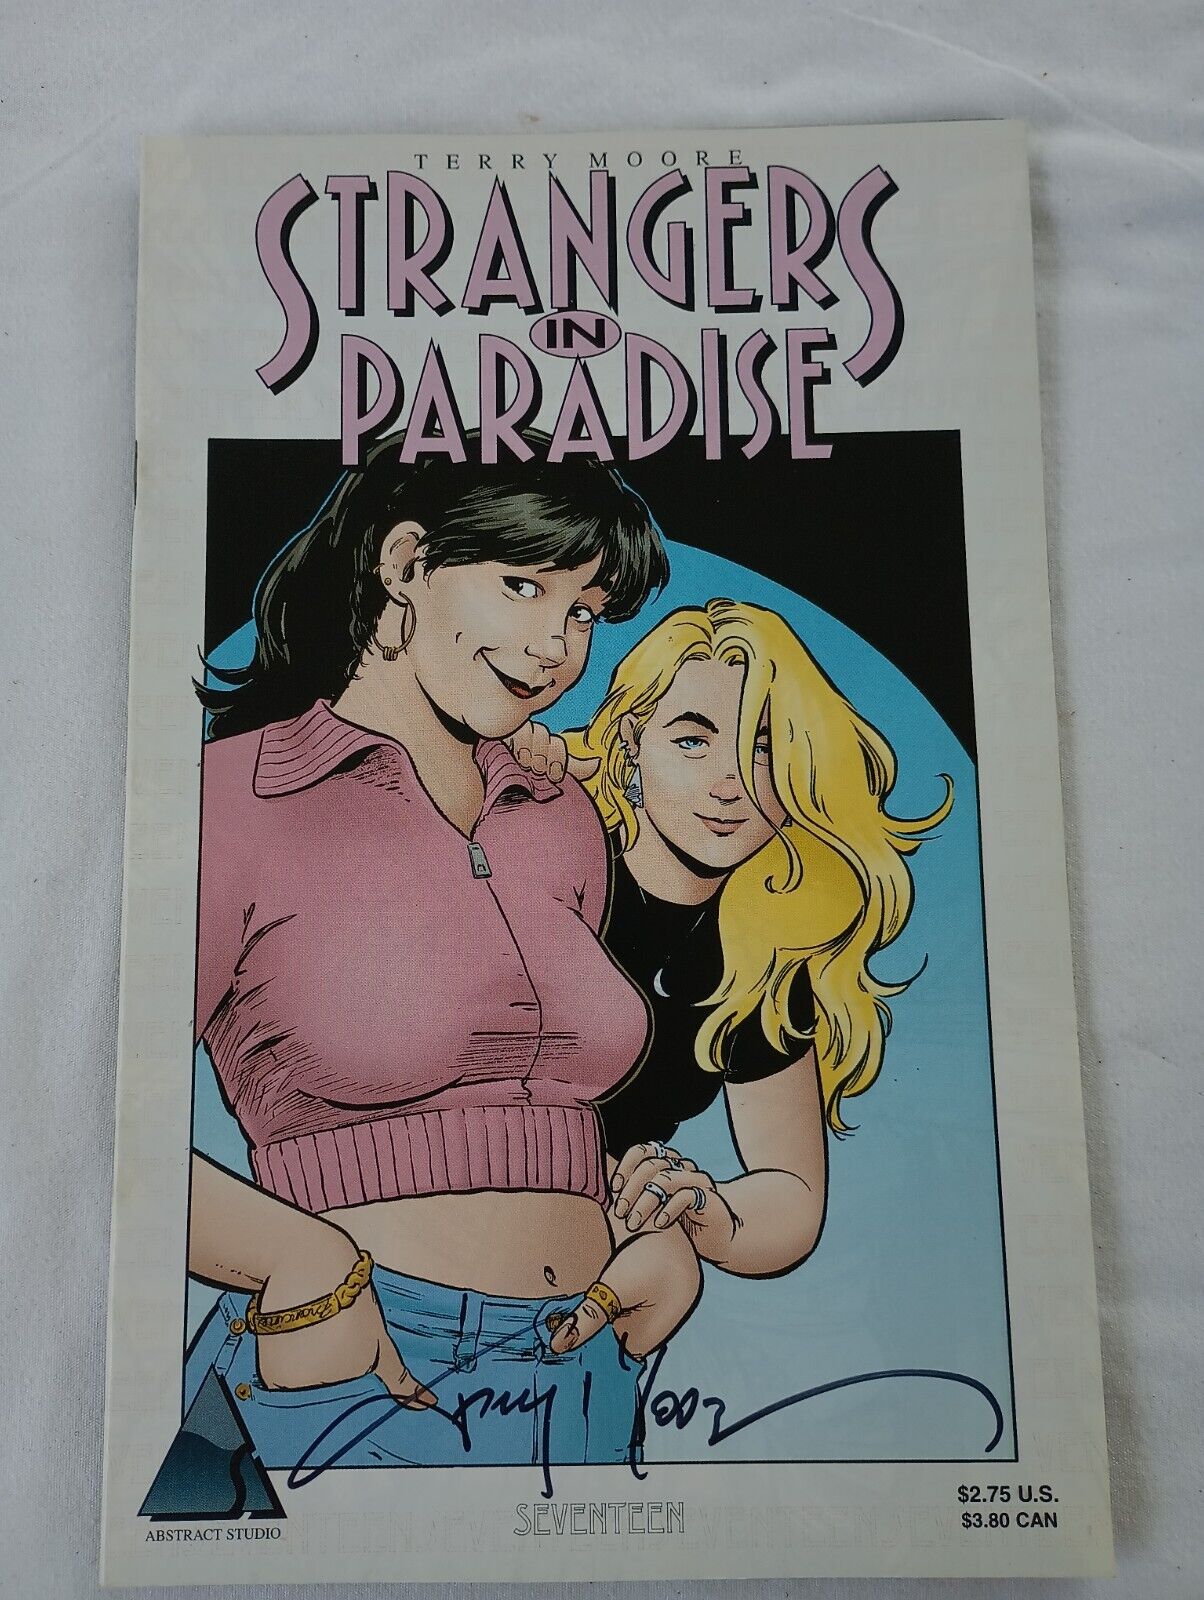 STRANGERS IN PARADISE #17 (VFNM) Abstract Studio signed by Terry Moore